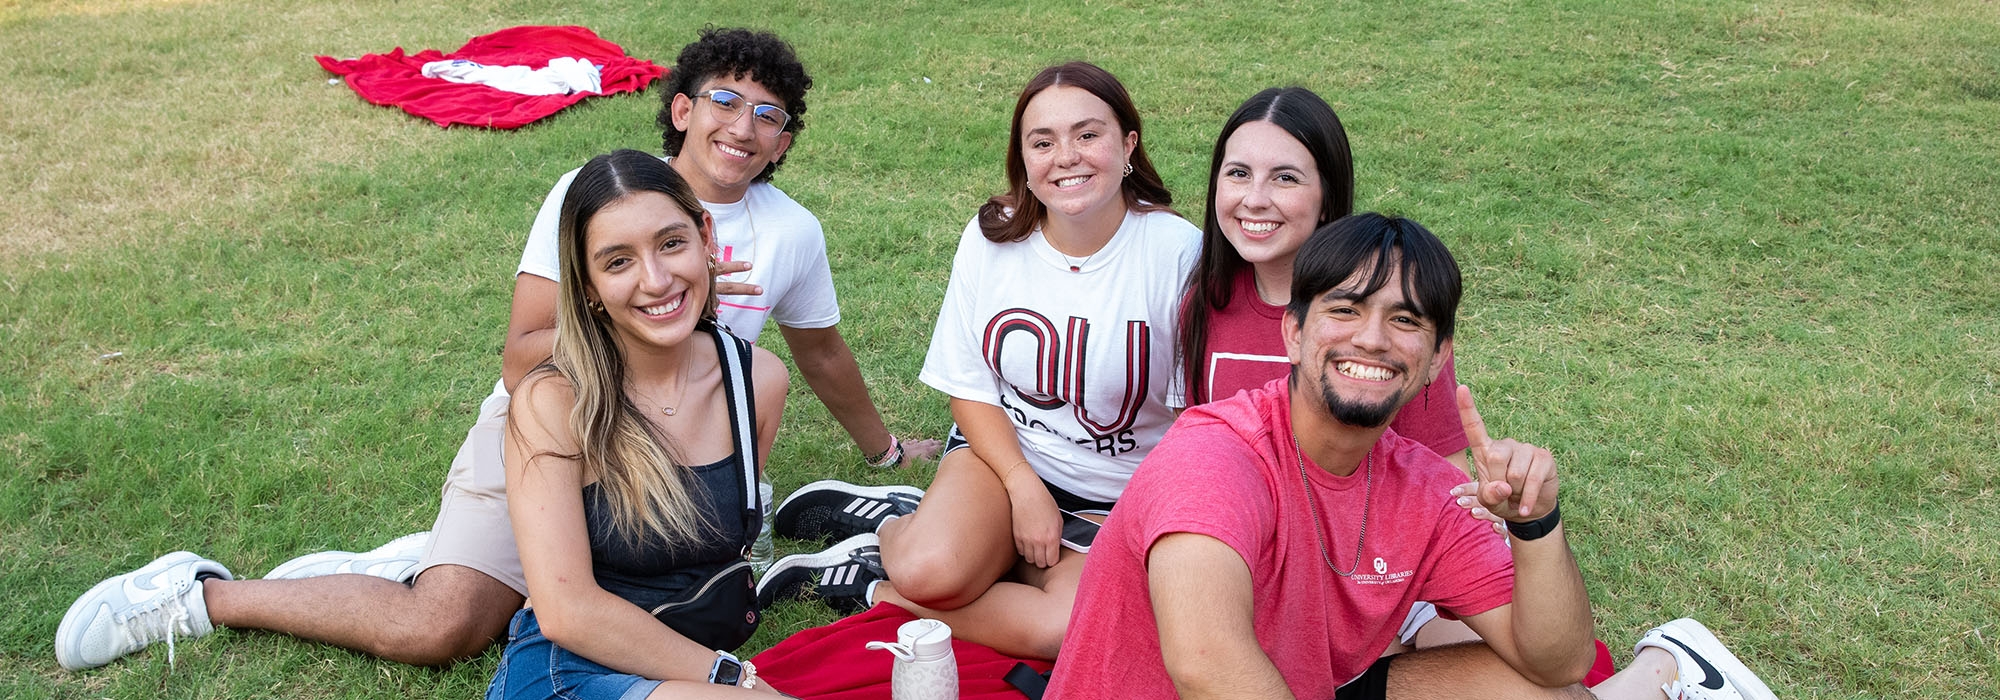 Students sitting in the grass at the University of Oklahoma.